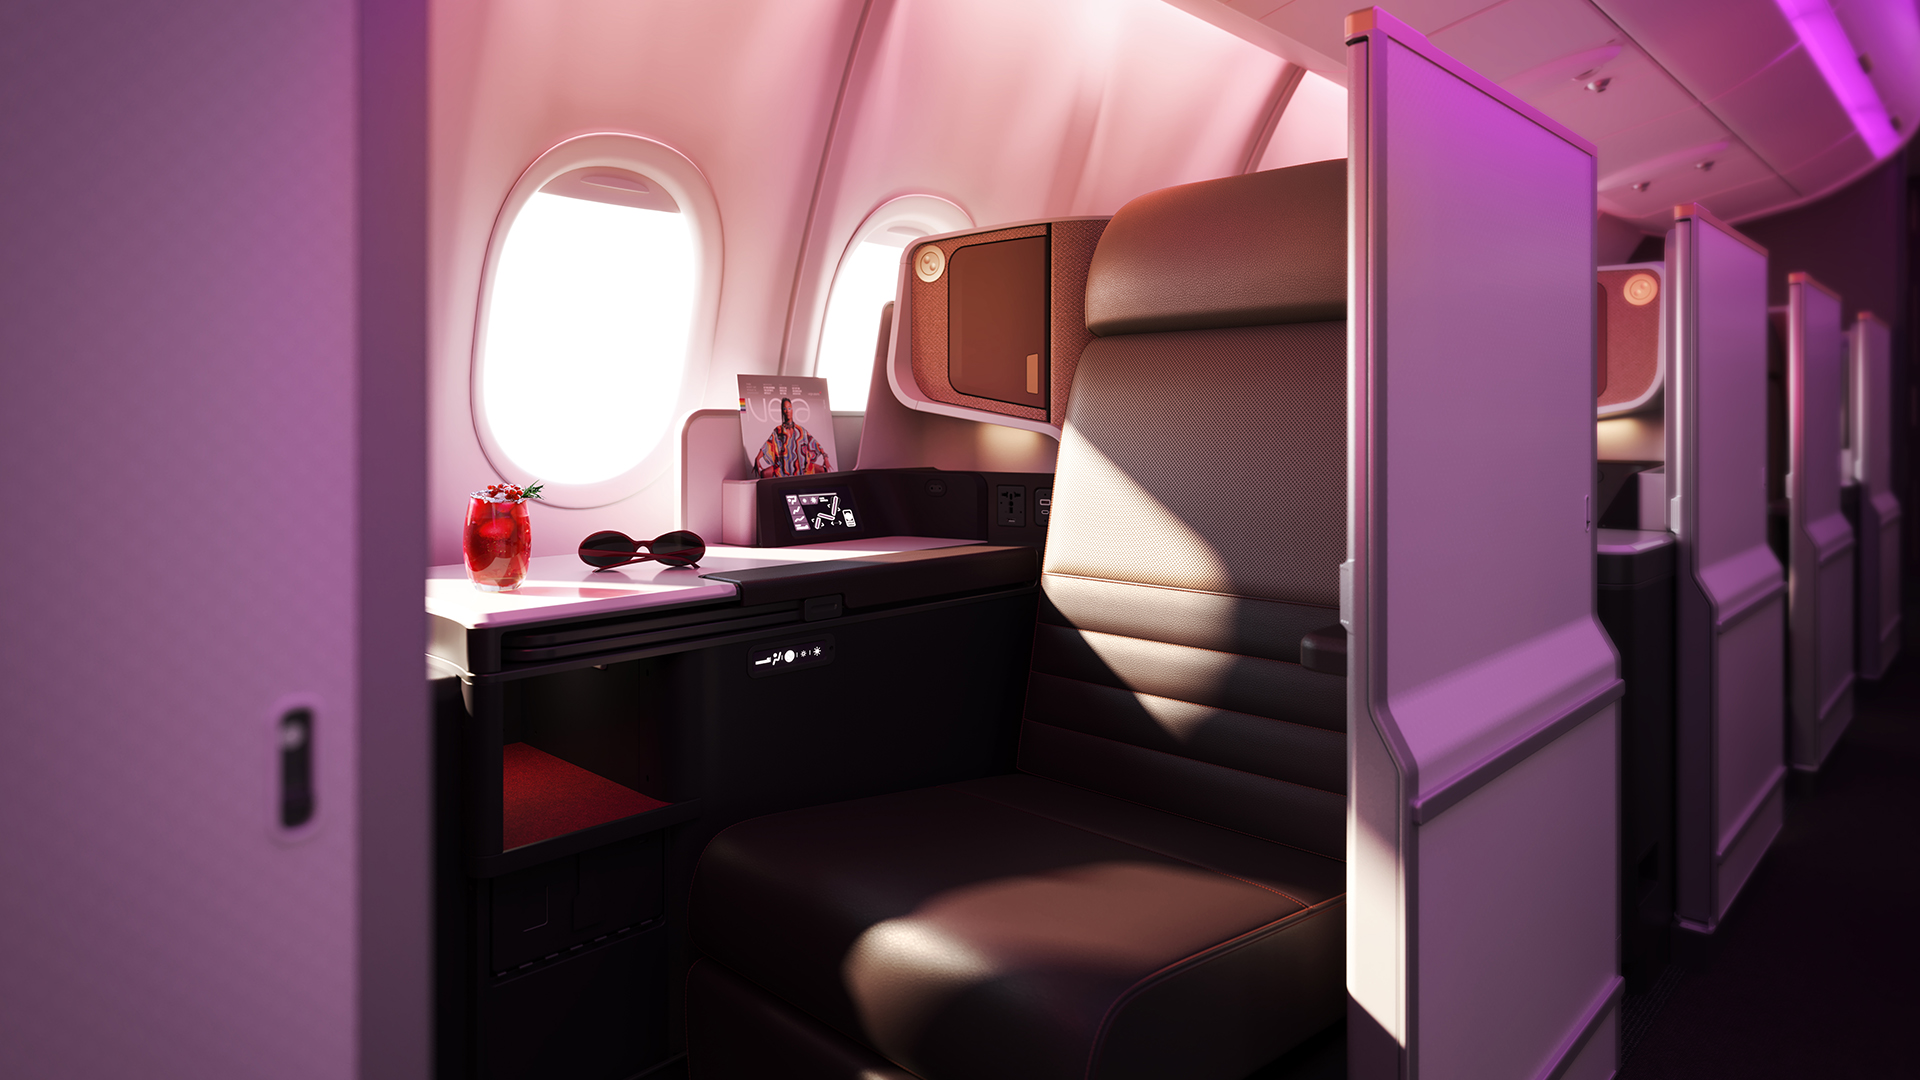 Virgin Atlantic New A330Neo delights with ‘better-than-Upper
Class’ product and better fleet alignment